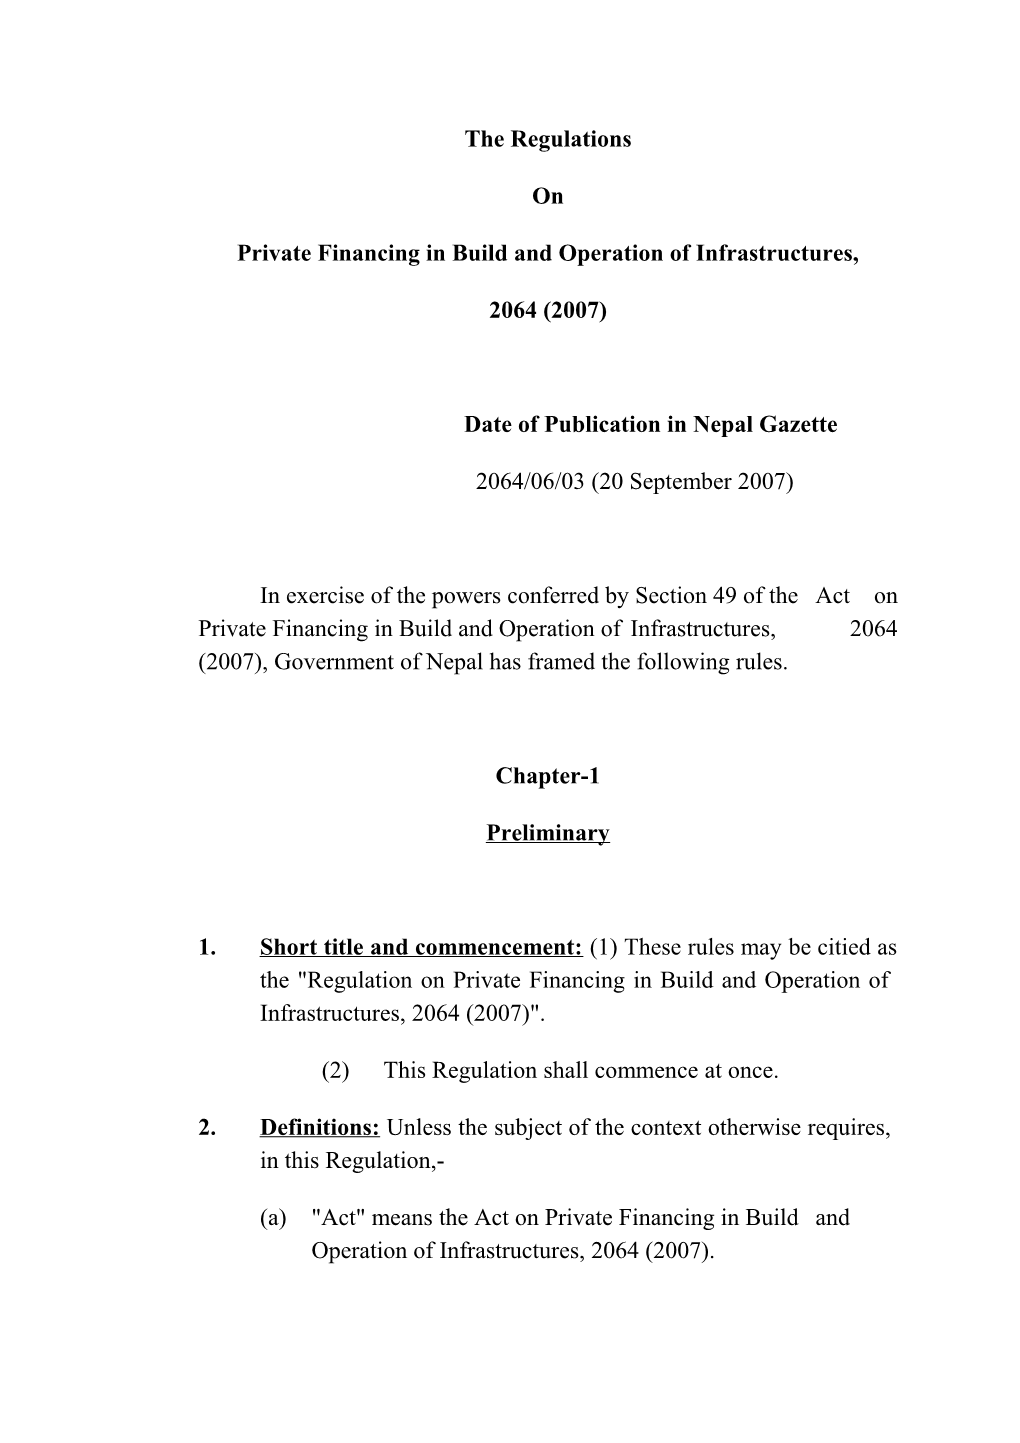 Private Financing in Build and Operation of Infrastructures